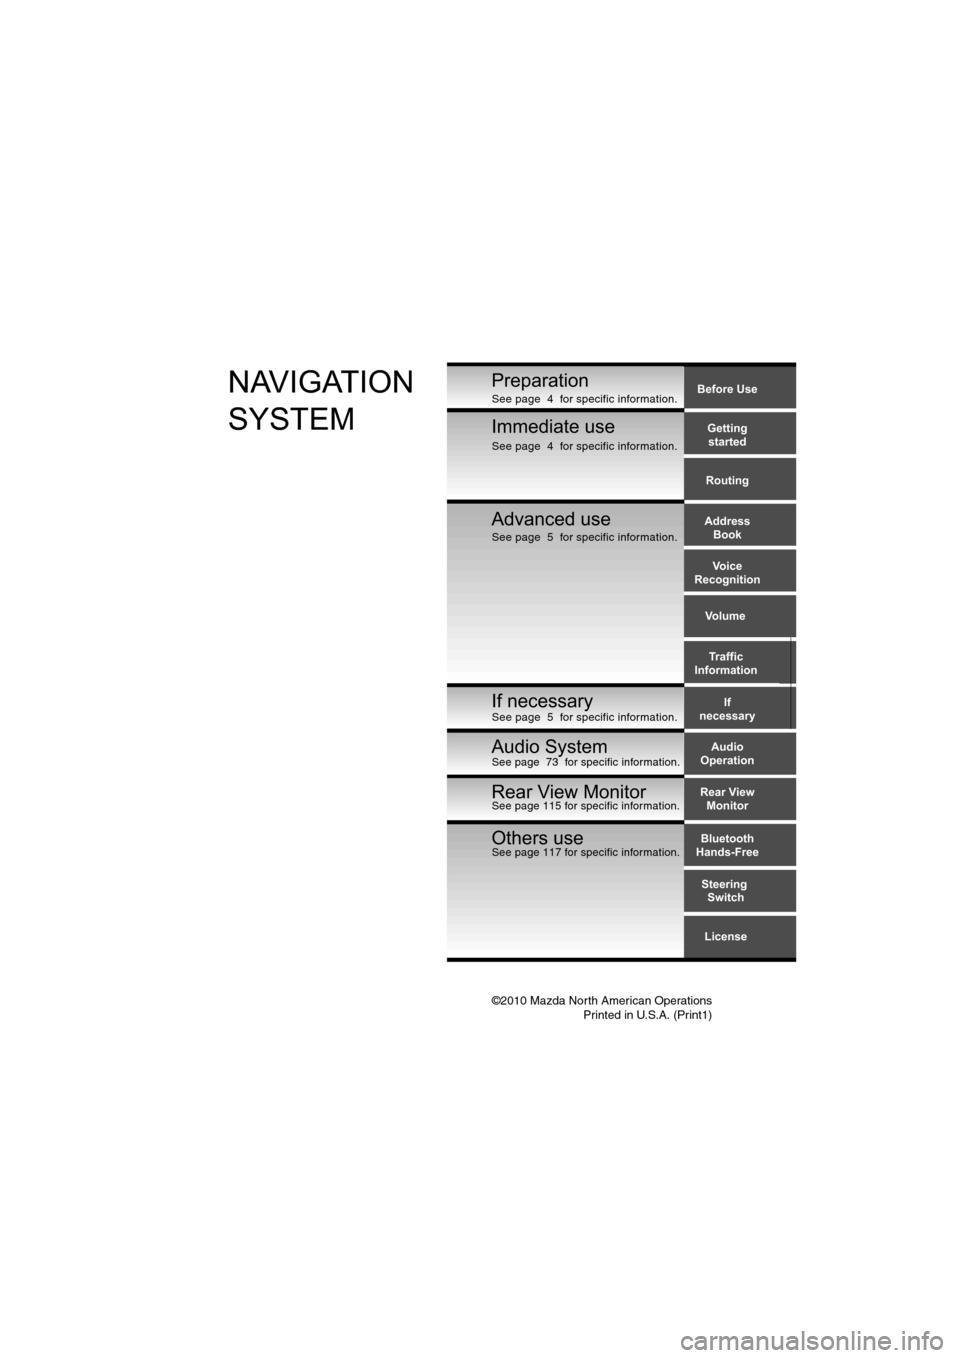 MAZDA MODEL 6 2011  Navigation Manual (in English) ©2010 Mazda North American OperationsPrinted in U.S.A. (Print1)
Before Use
Gettingstarted
Routing
Address Book
Voice 
Recognition
Volume
If
necessary Traffic
InformationPreparationNAVIGATION 
SYSTEM
